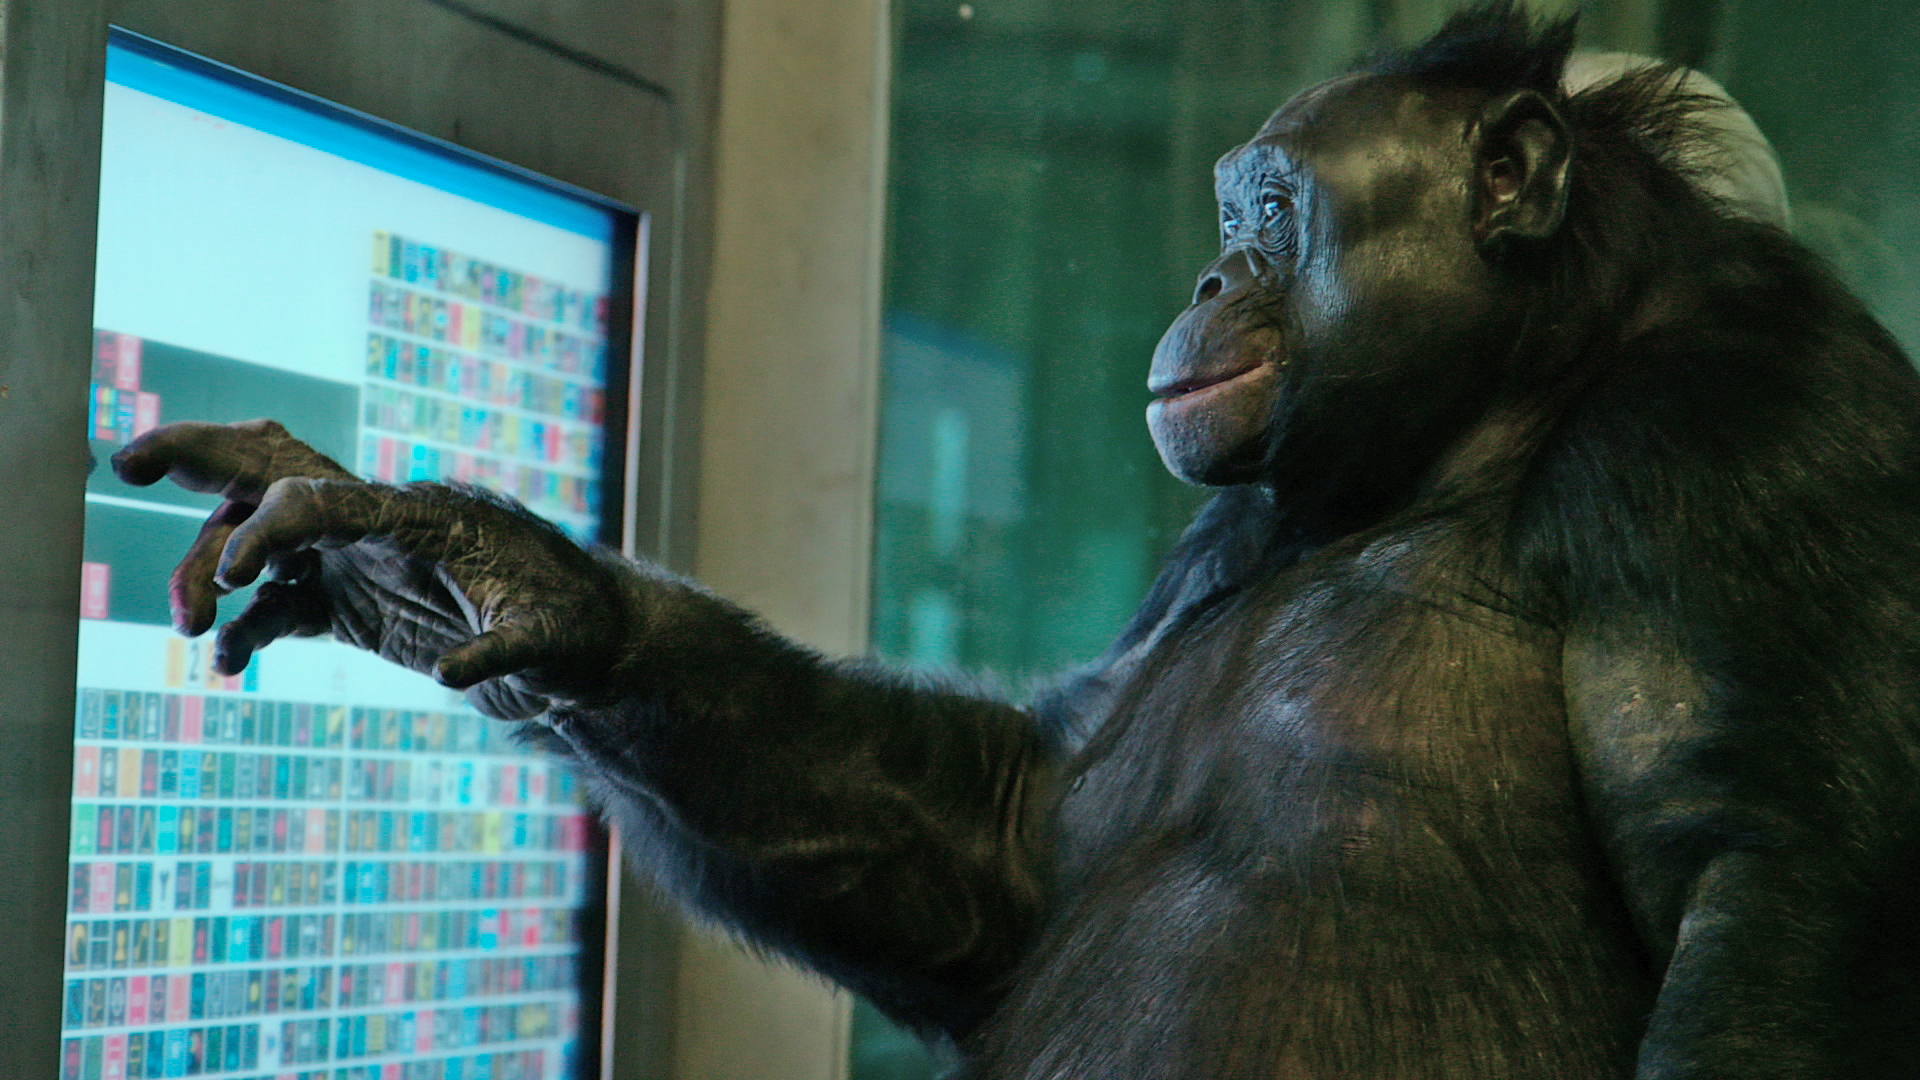 Should A Chimpanzee Be Considered A Person?